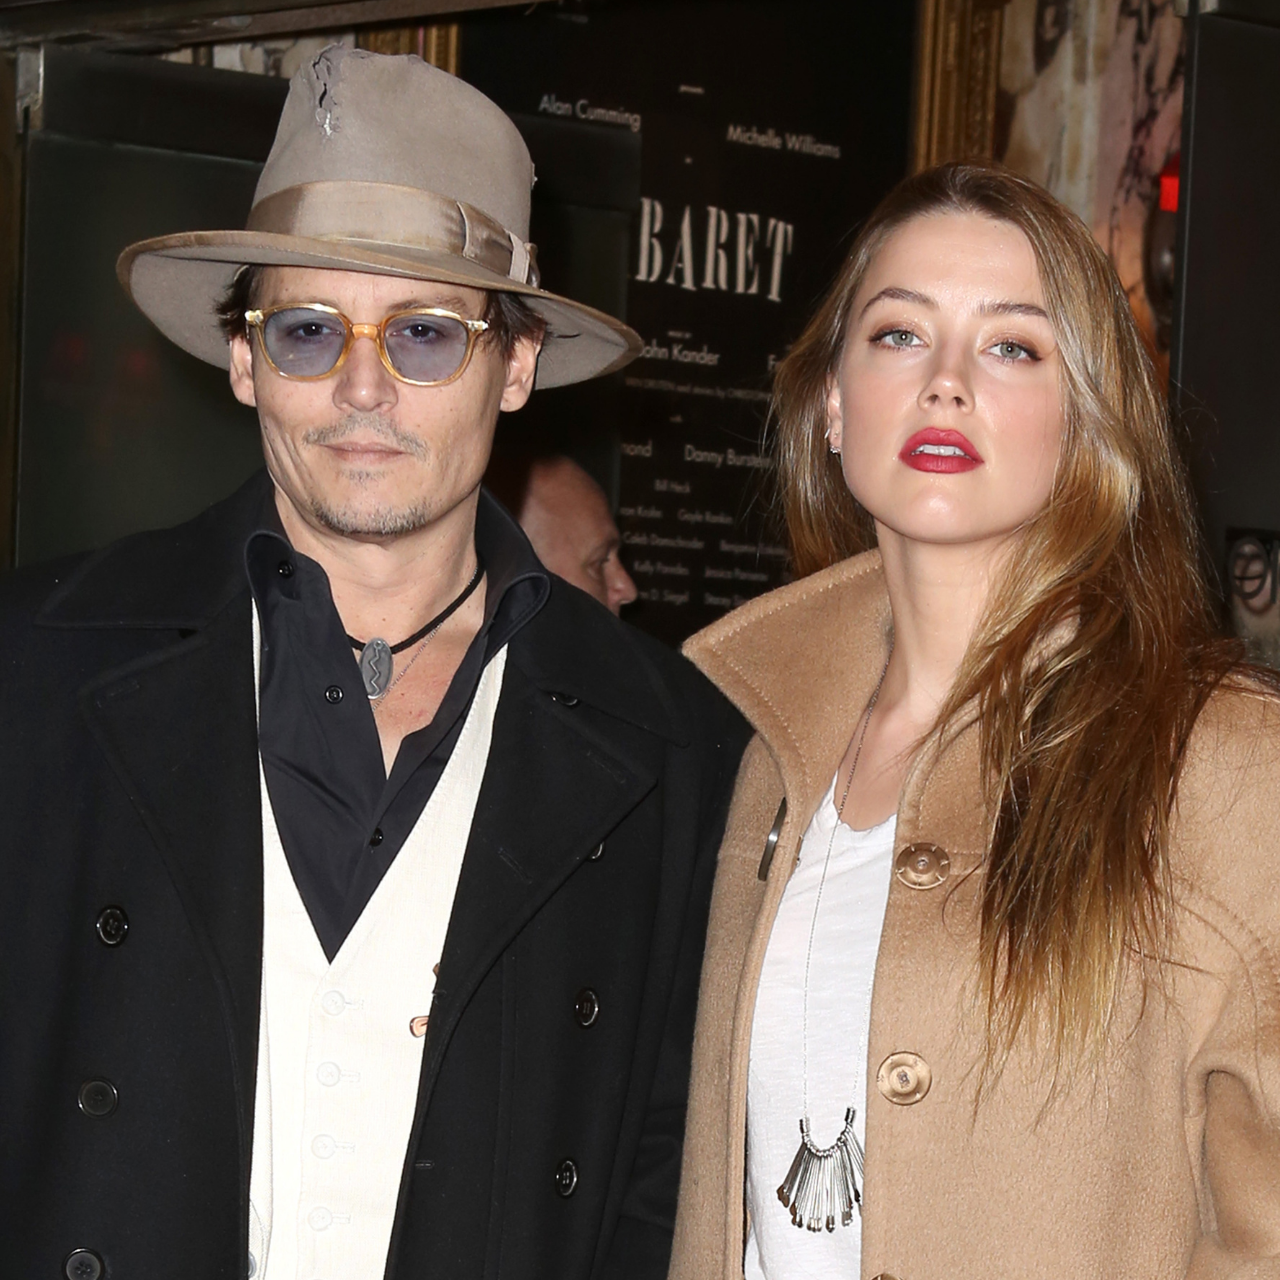 Johnny Depp and Amber Heard attend opening night of Broadway's Cabaret 2014